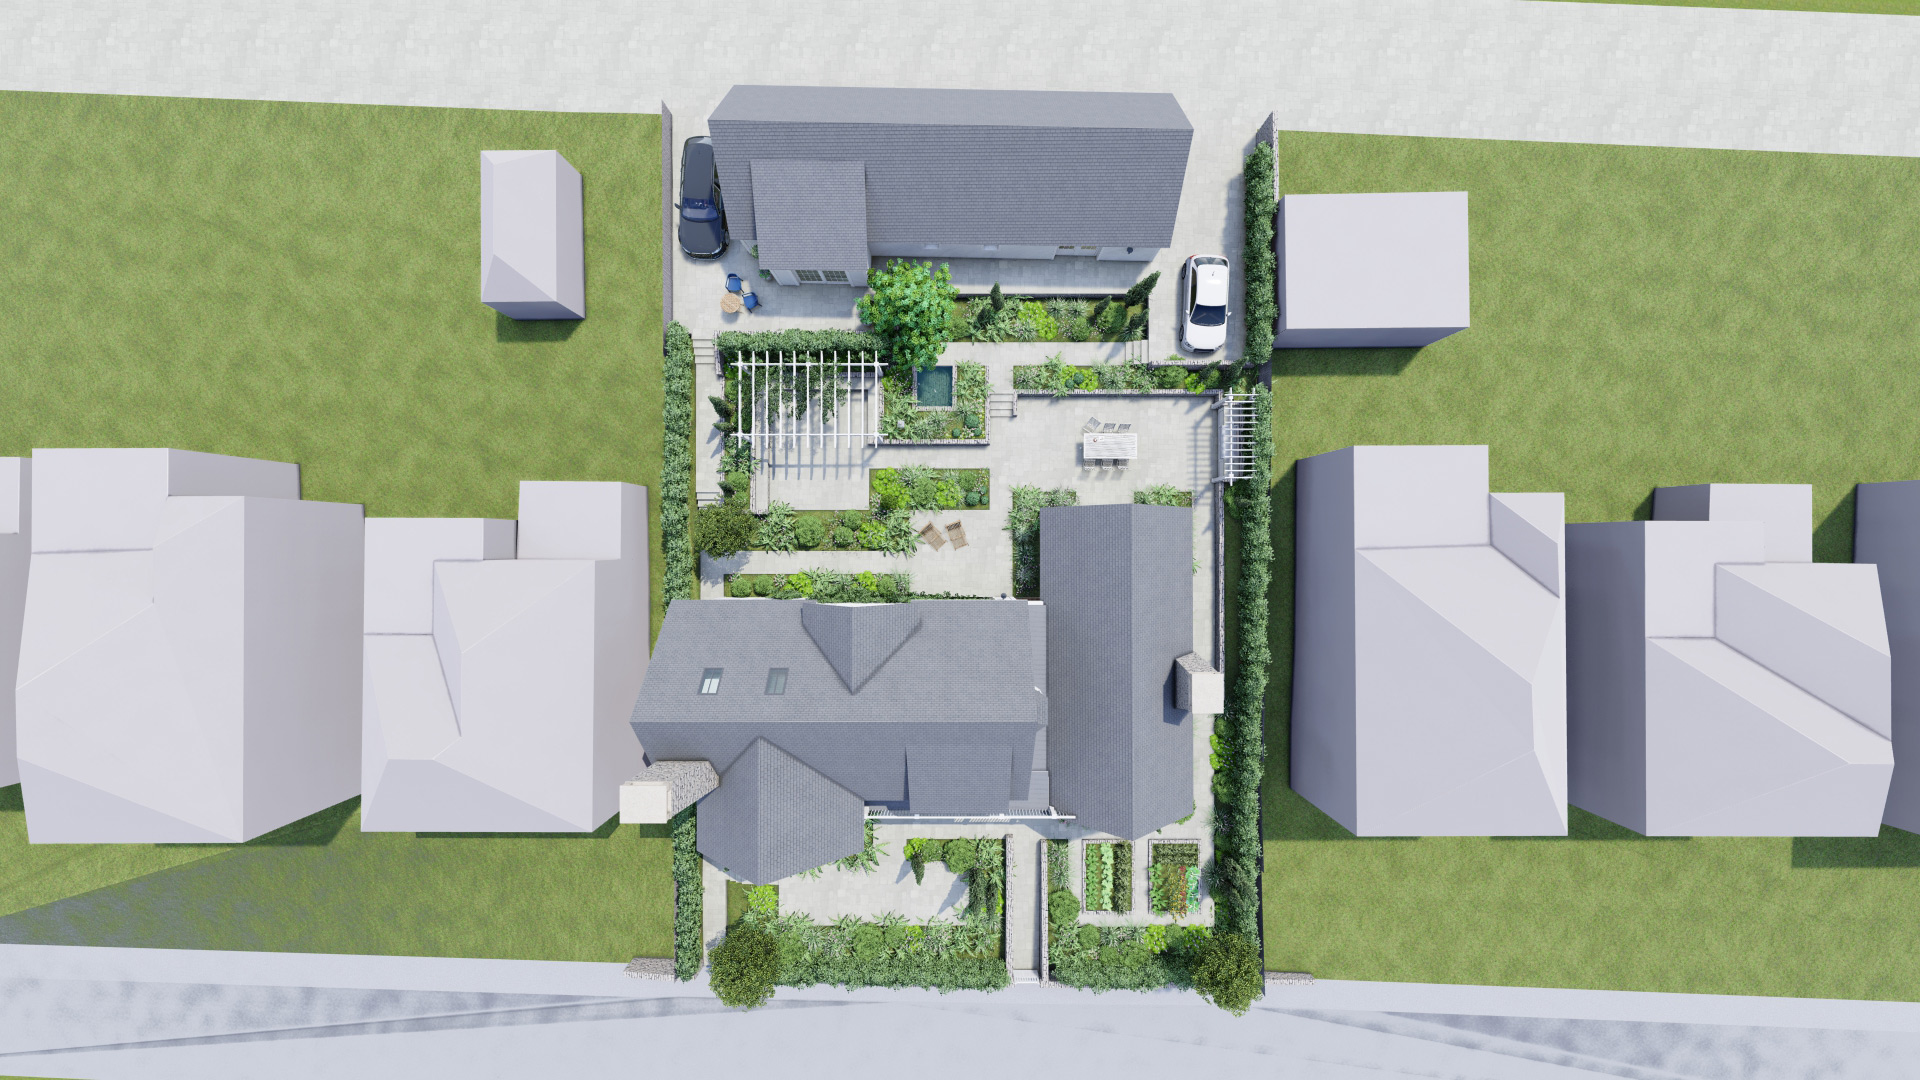 birds eye view visual of house with landscaped garden